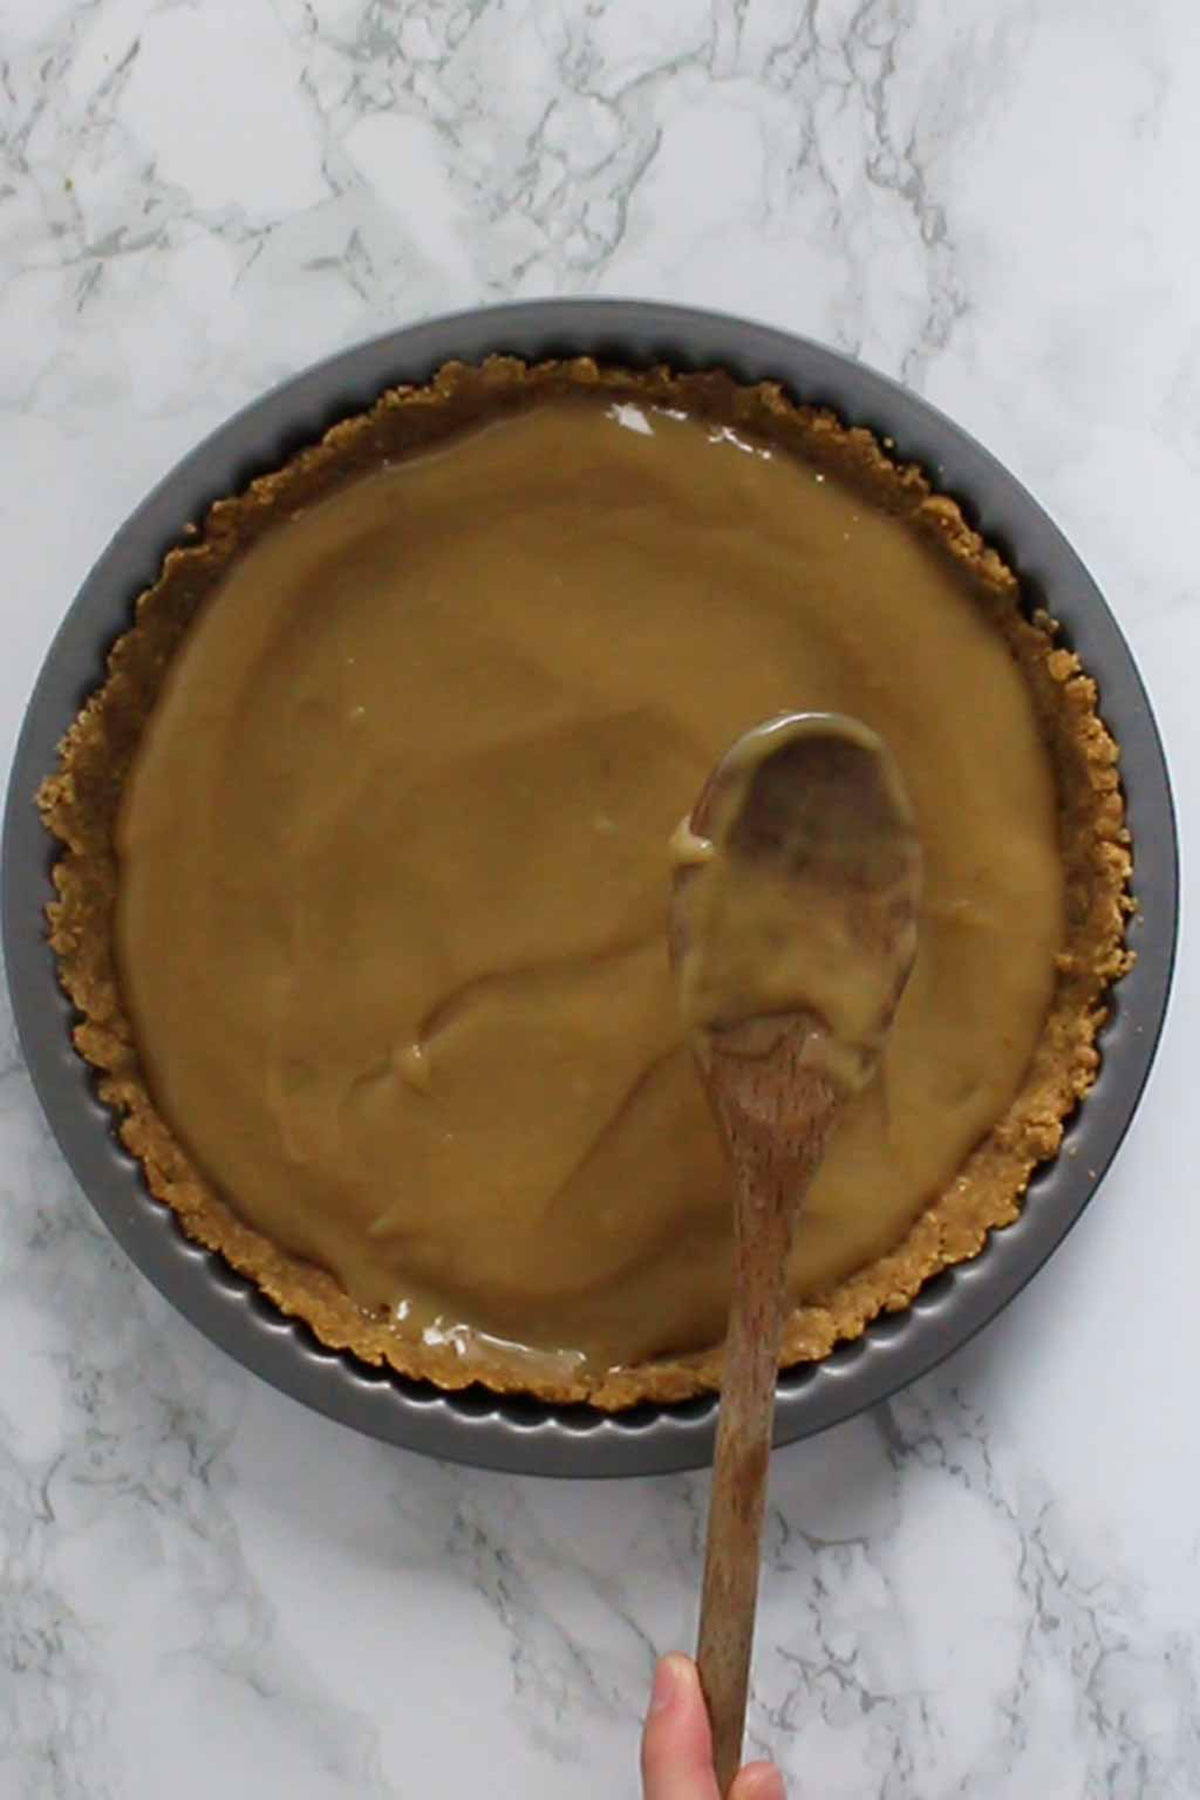 Spreading Dairy Free Caramel Onto Biscuit Base